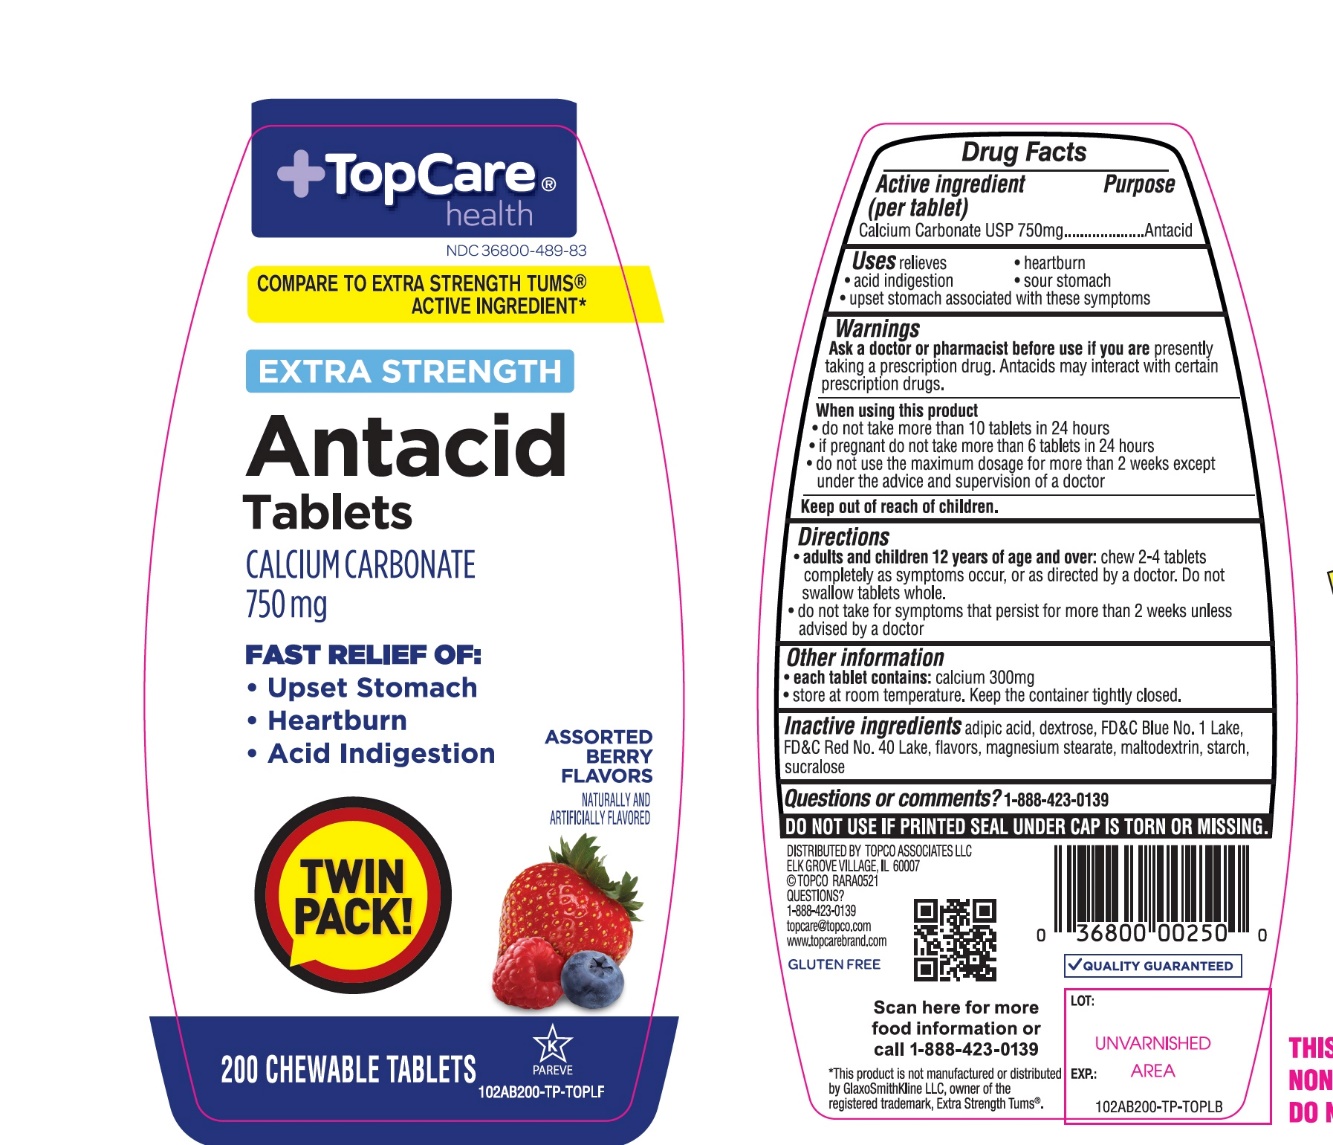 Extra Strength Antacid 200 Chewable Tablets